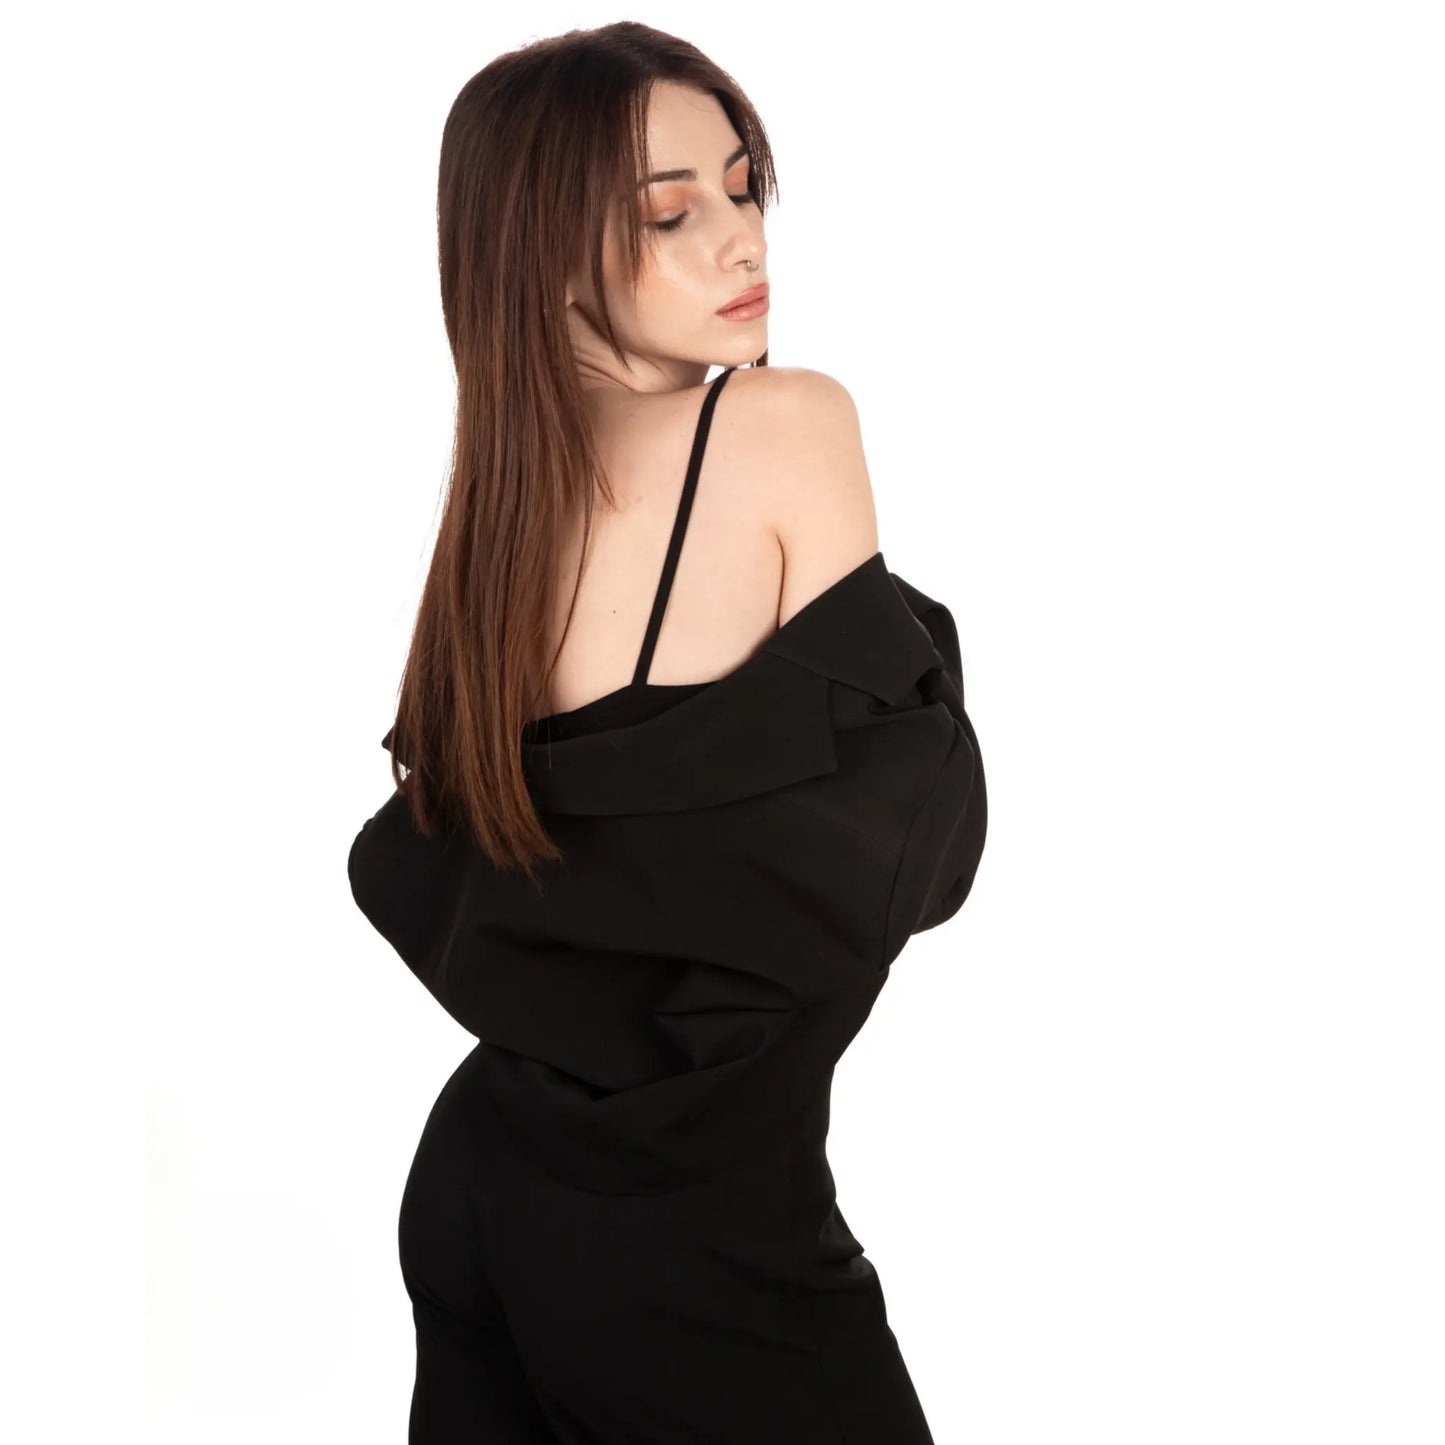 Oversized Cropped Blazer & Wide-Leg Trousers Set worn by brunette woman back view with a pose